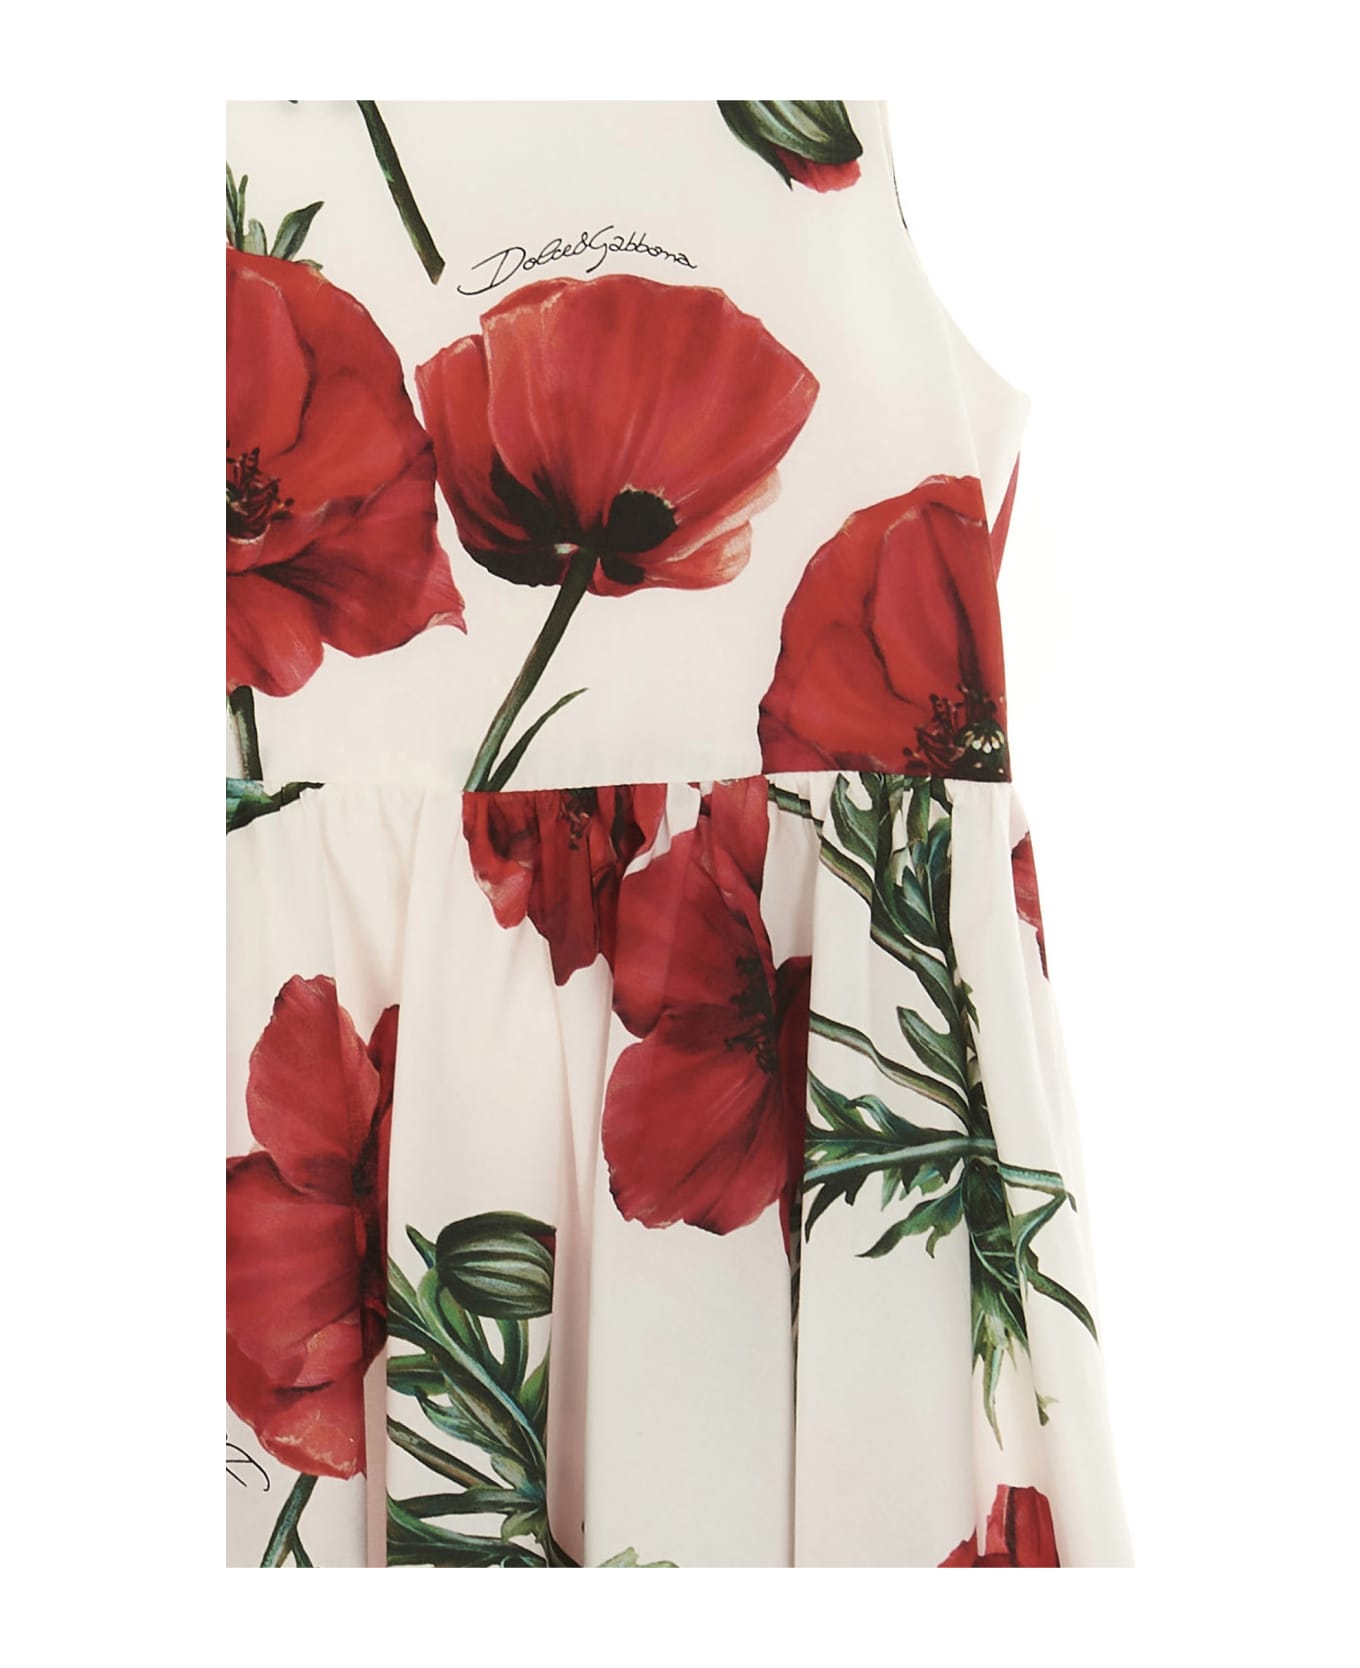 Dolce & Gabbana Floral Printed Dress - WHITE/RED